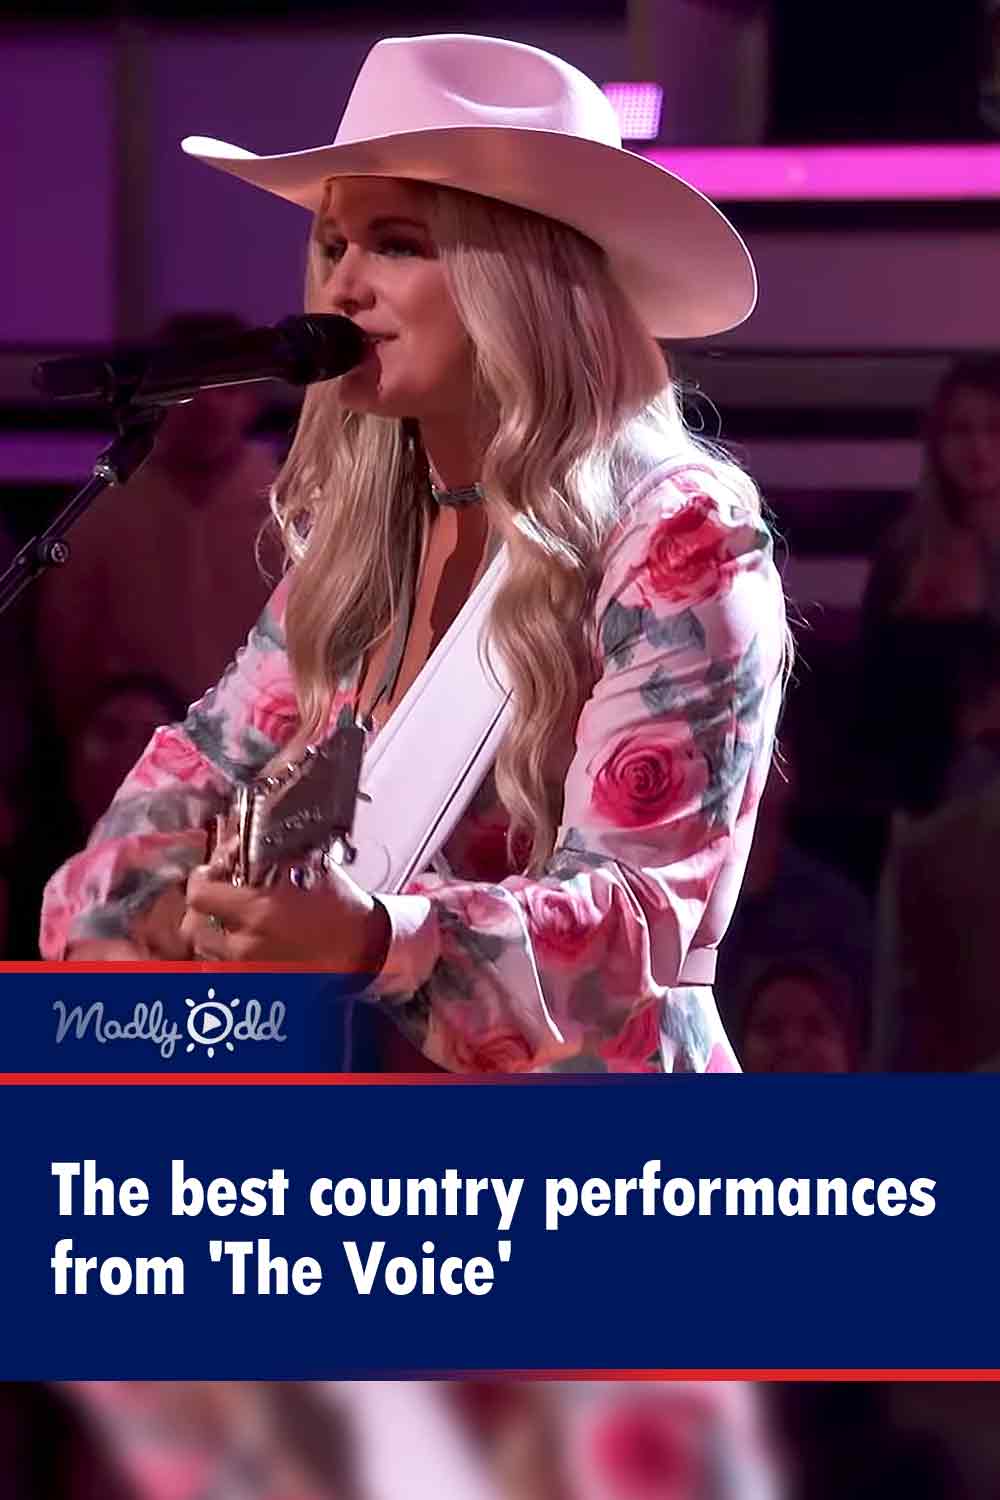 The best country performances from ‘The Voice’ Madly Odd!